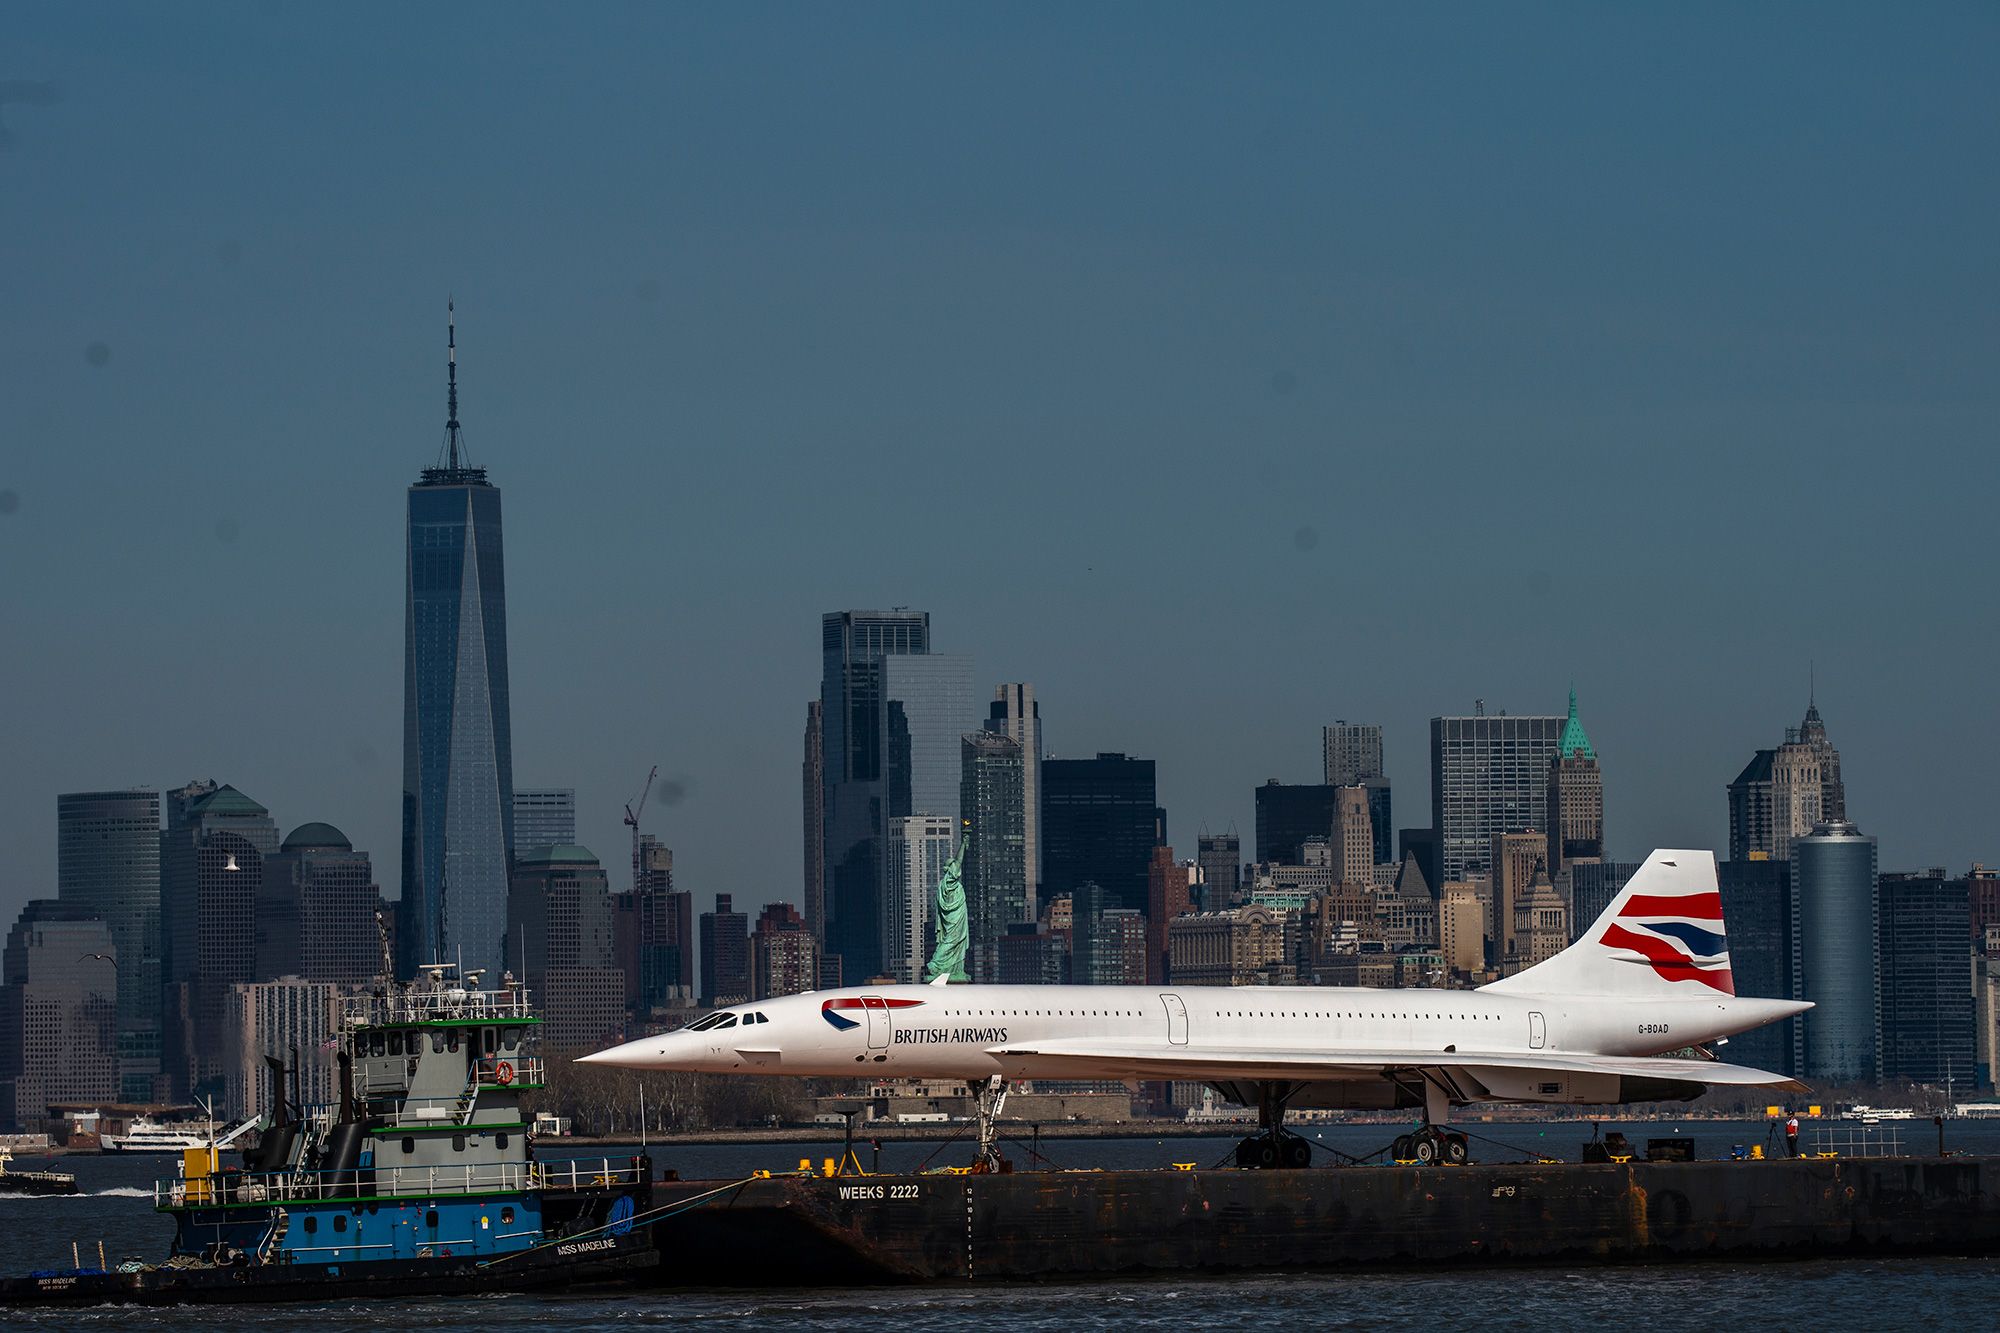 A retired British Airways Concorde has been making its way down the Hudson River on a barge.